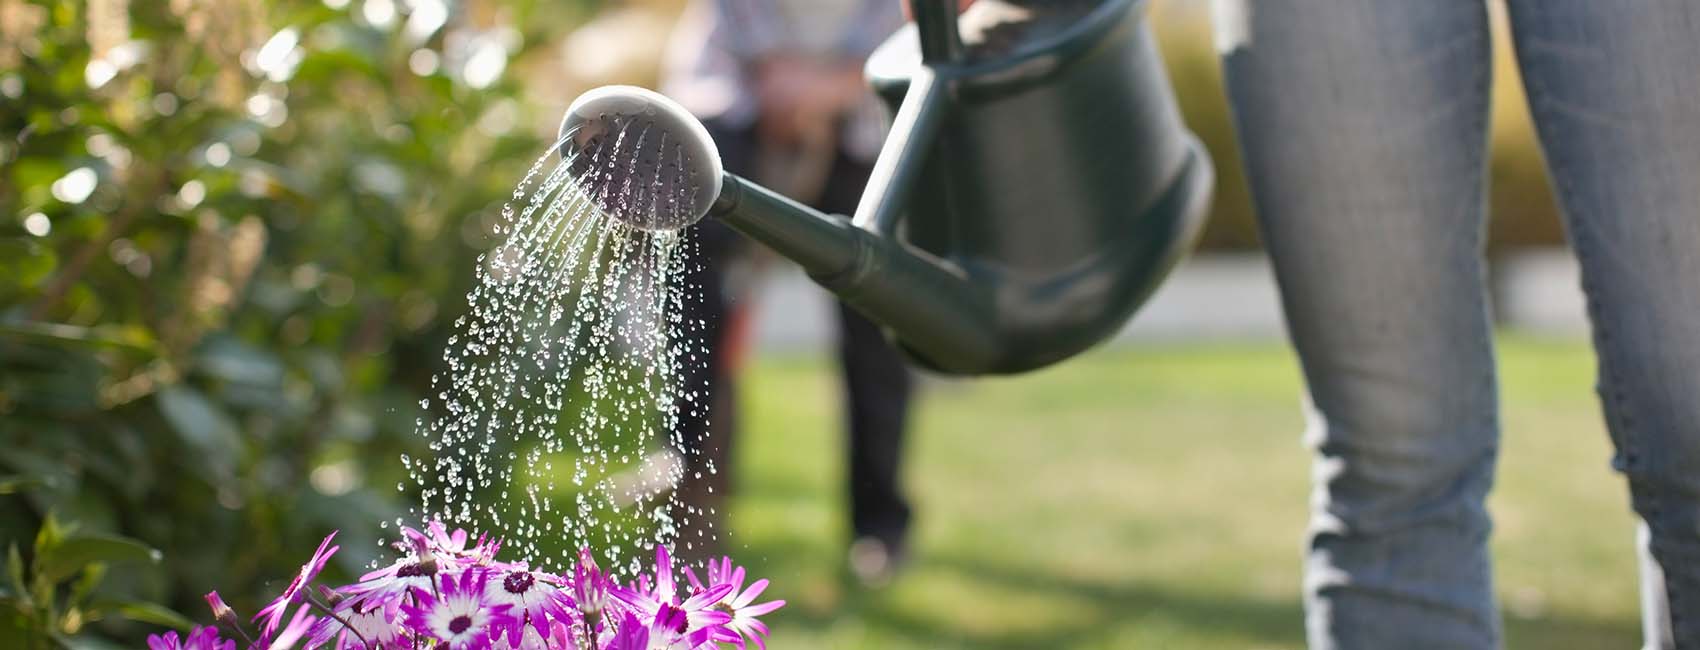 watering flowers in garden with watering can